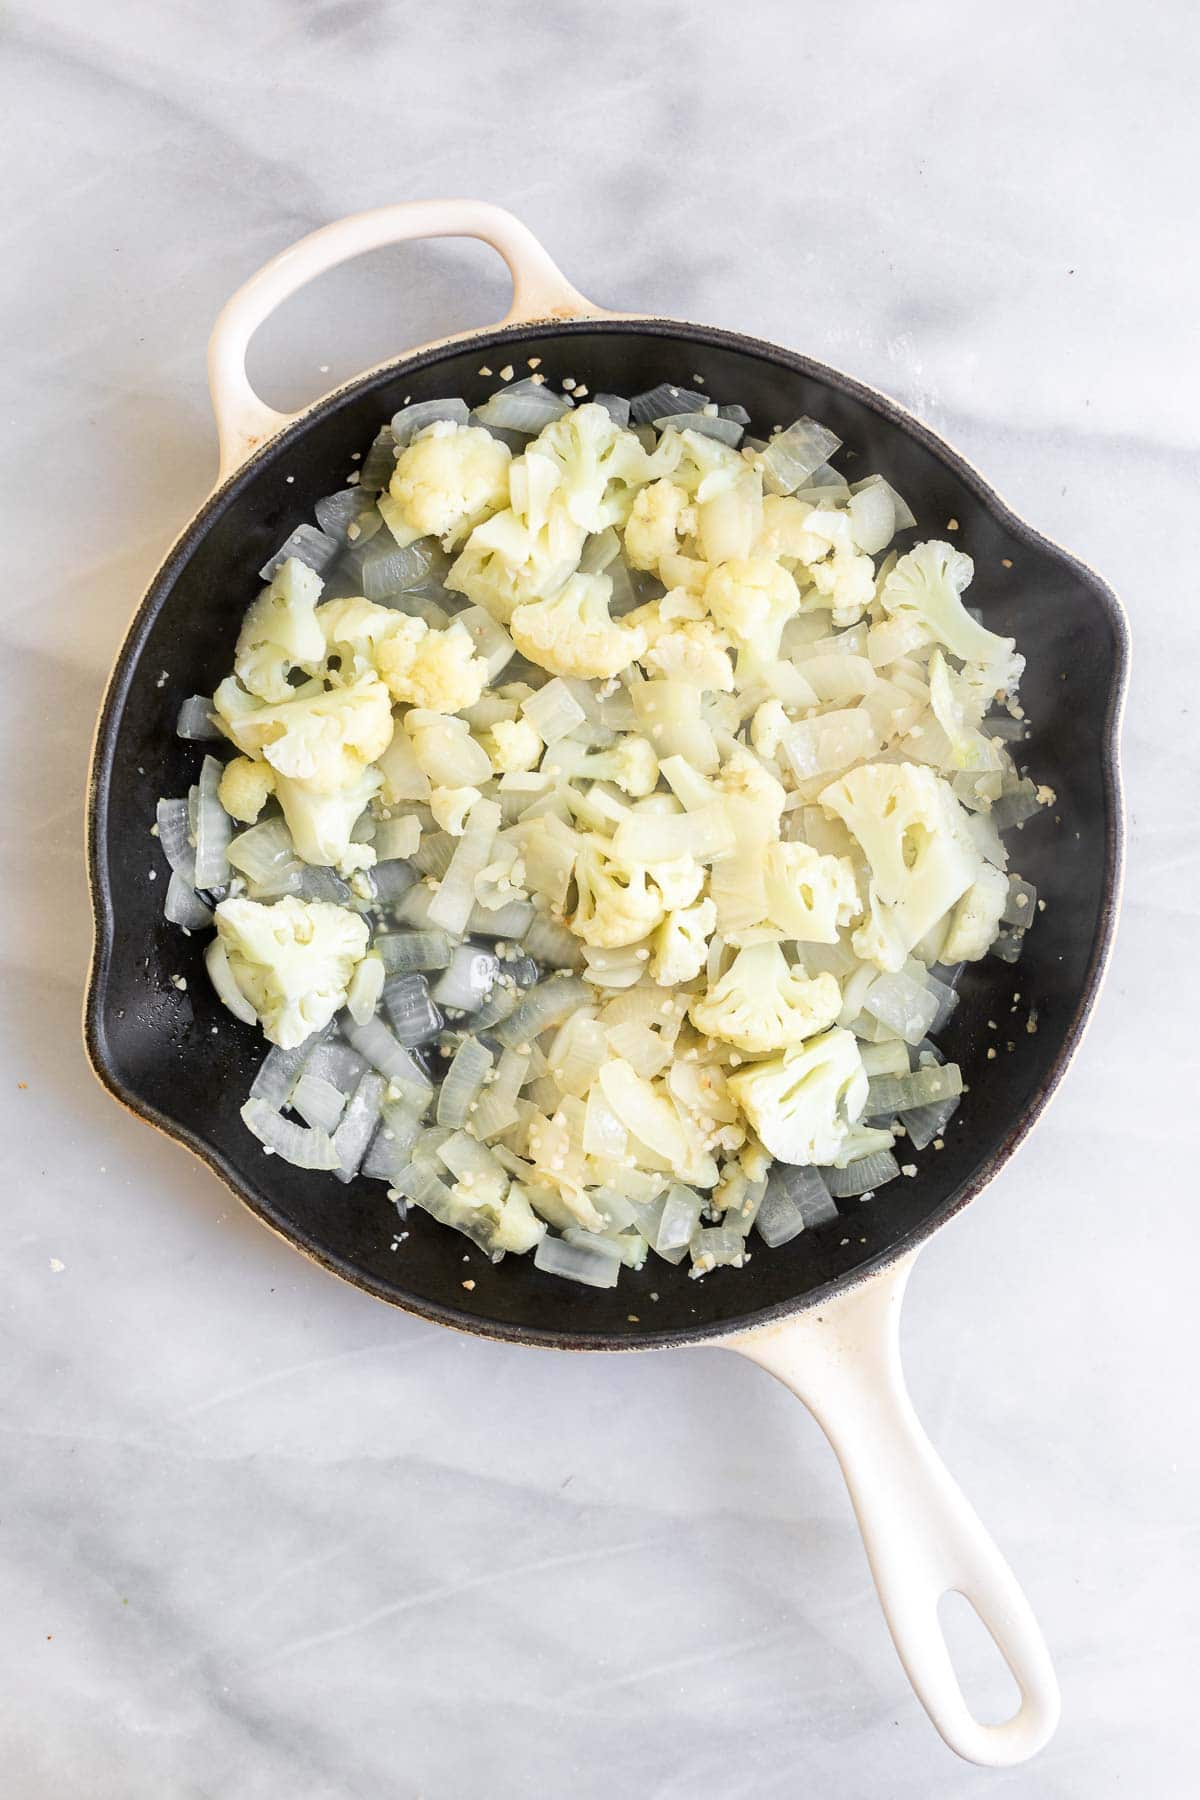 Onion and cauliflower sauteing in a pan.